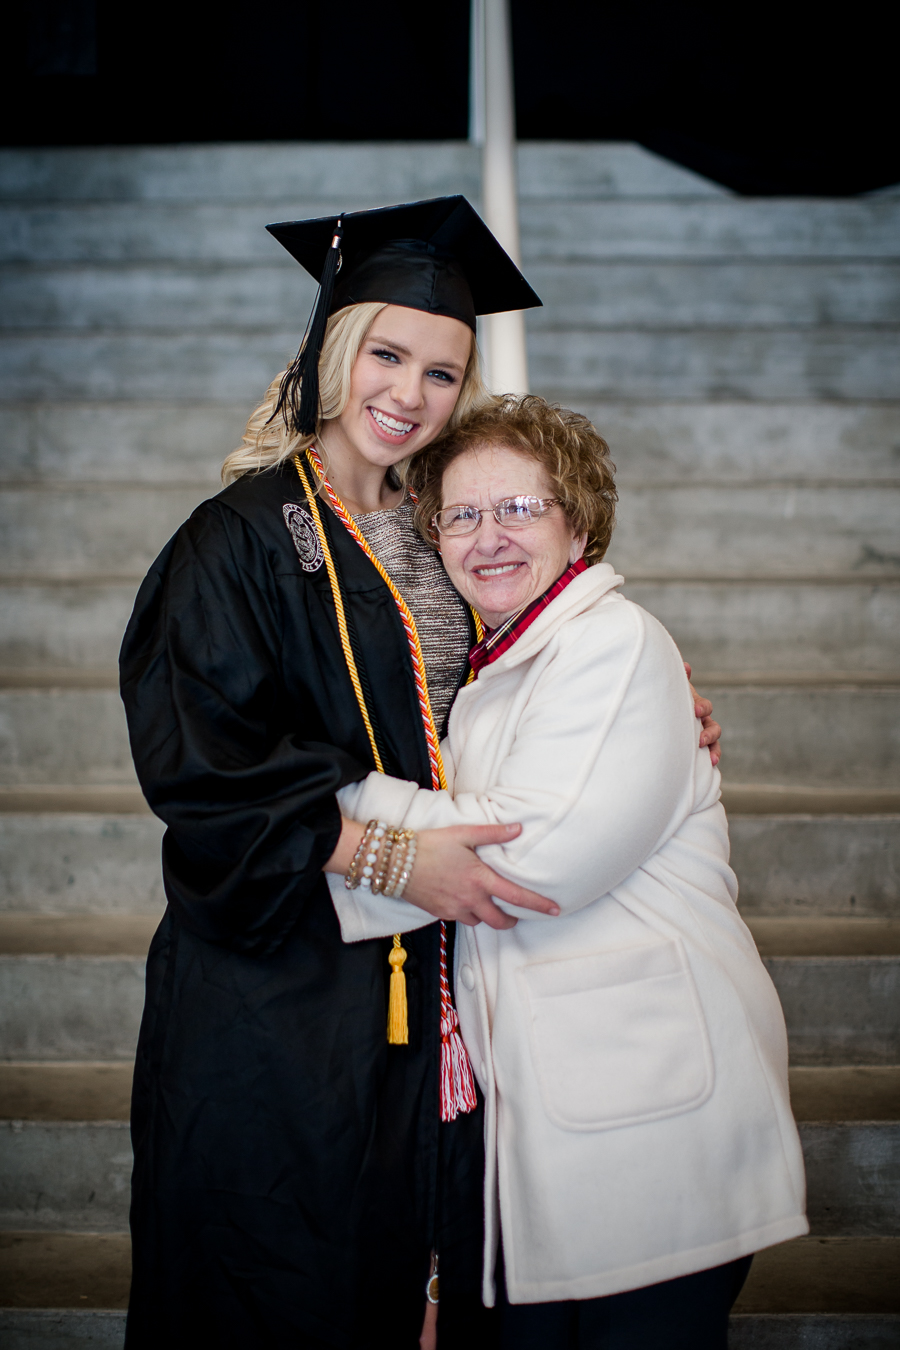 Graduate with her nana at this University of Tennessee graduation by Amanda May Photos.